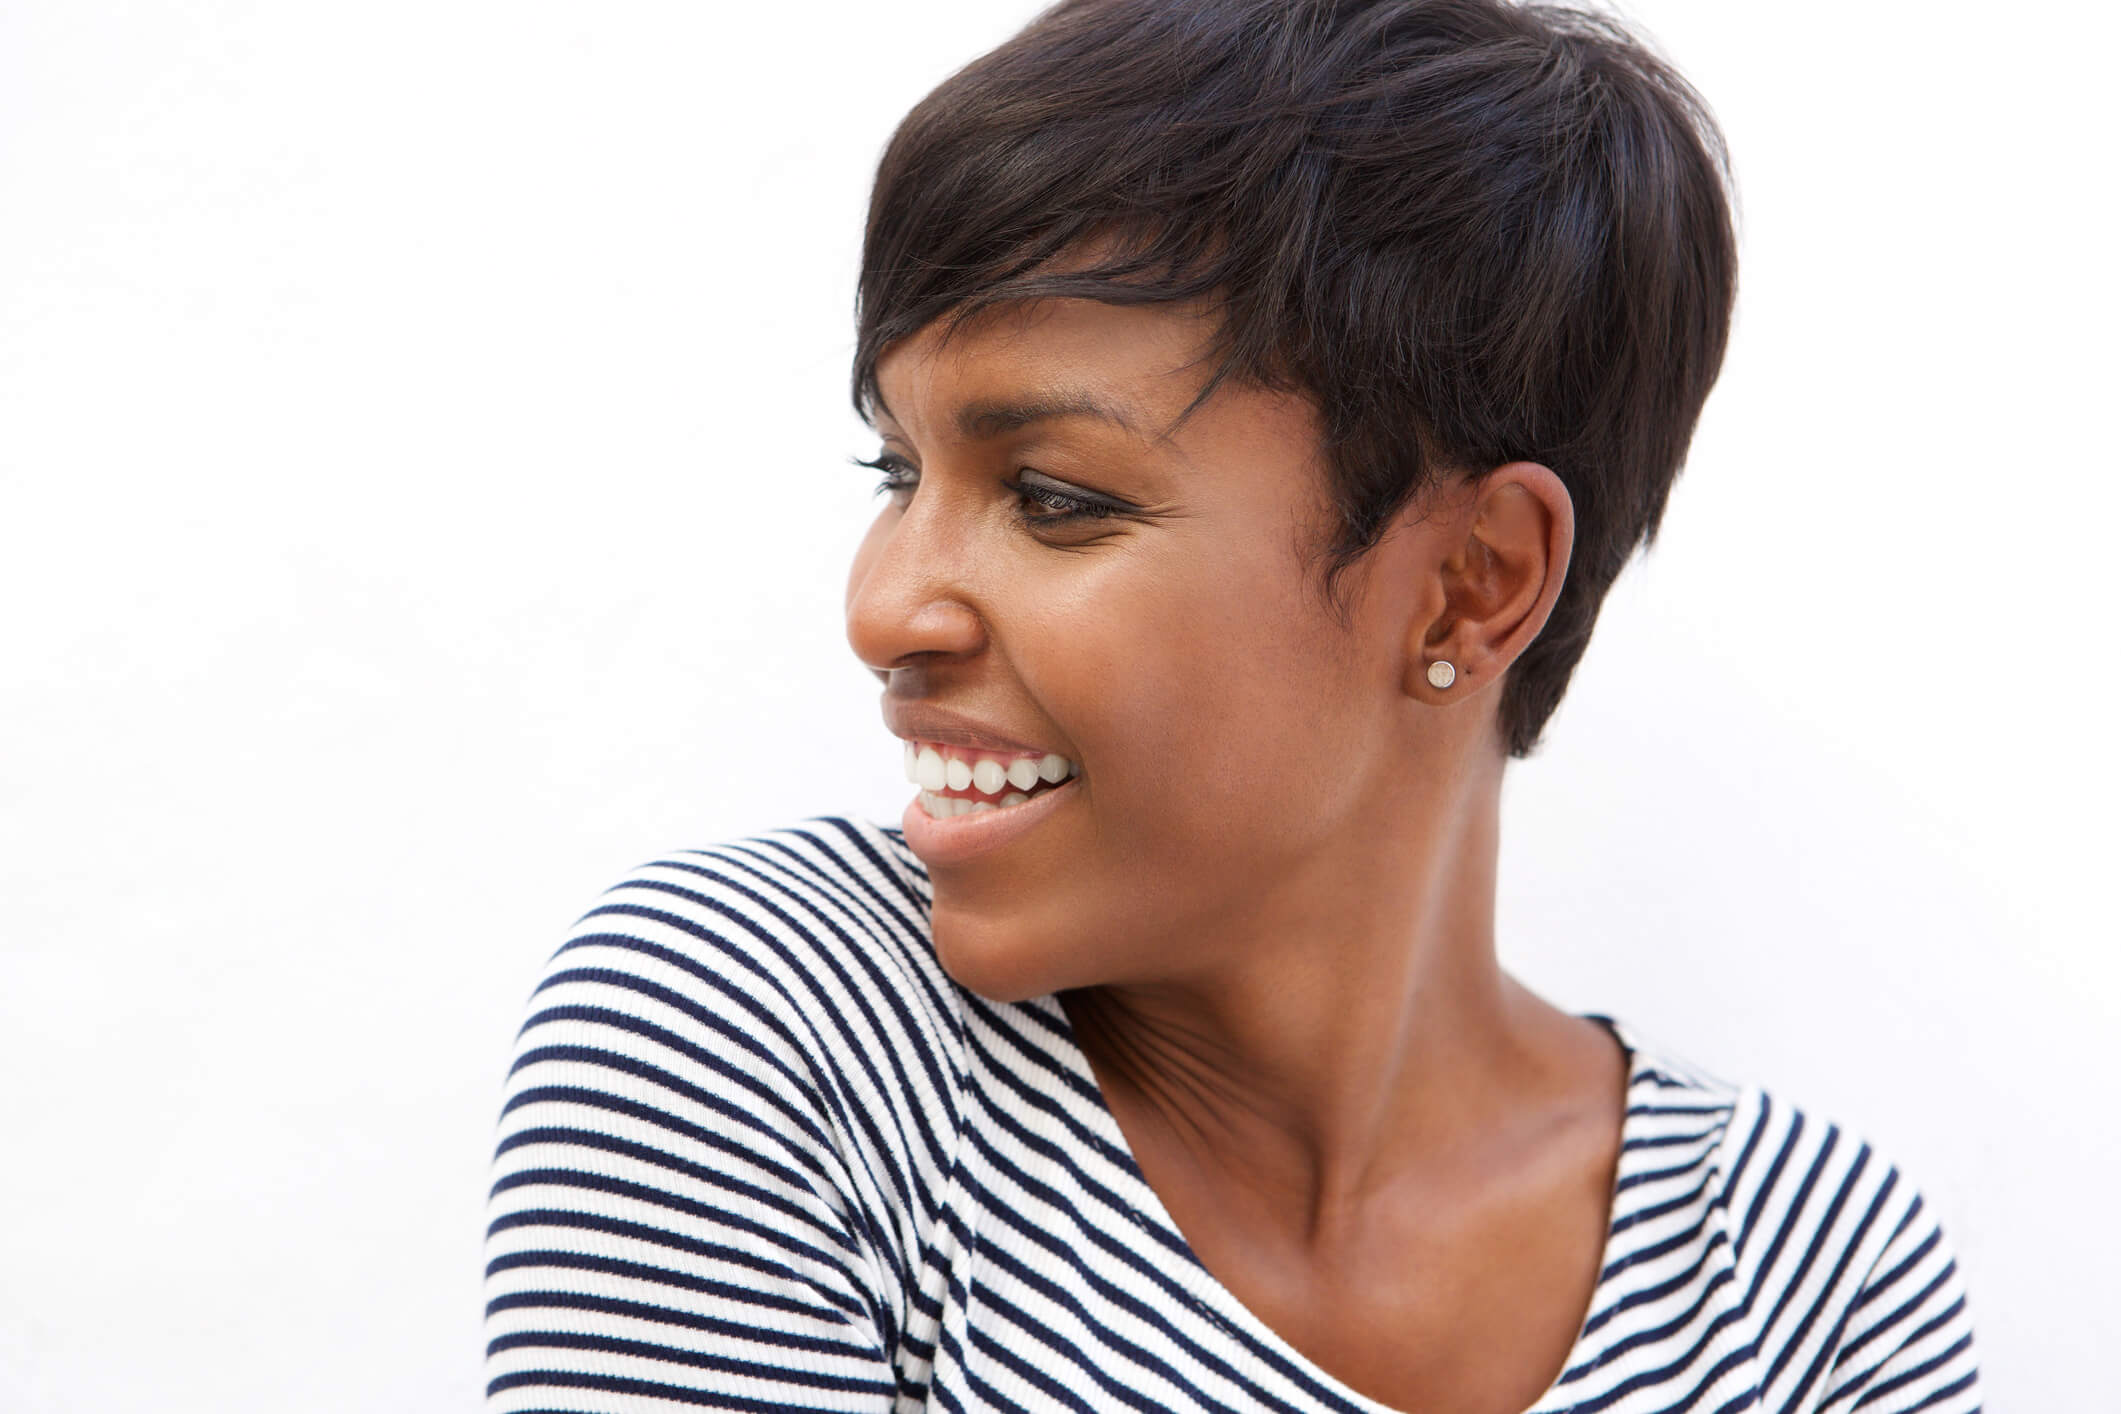 Image of a young African American woman smiling and looking away